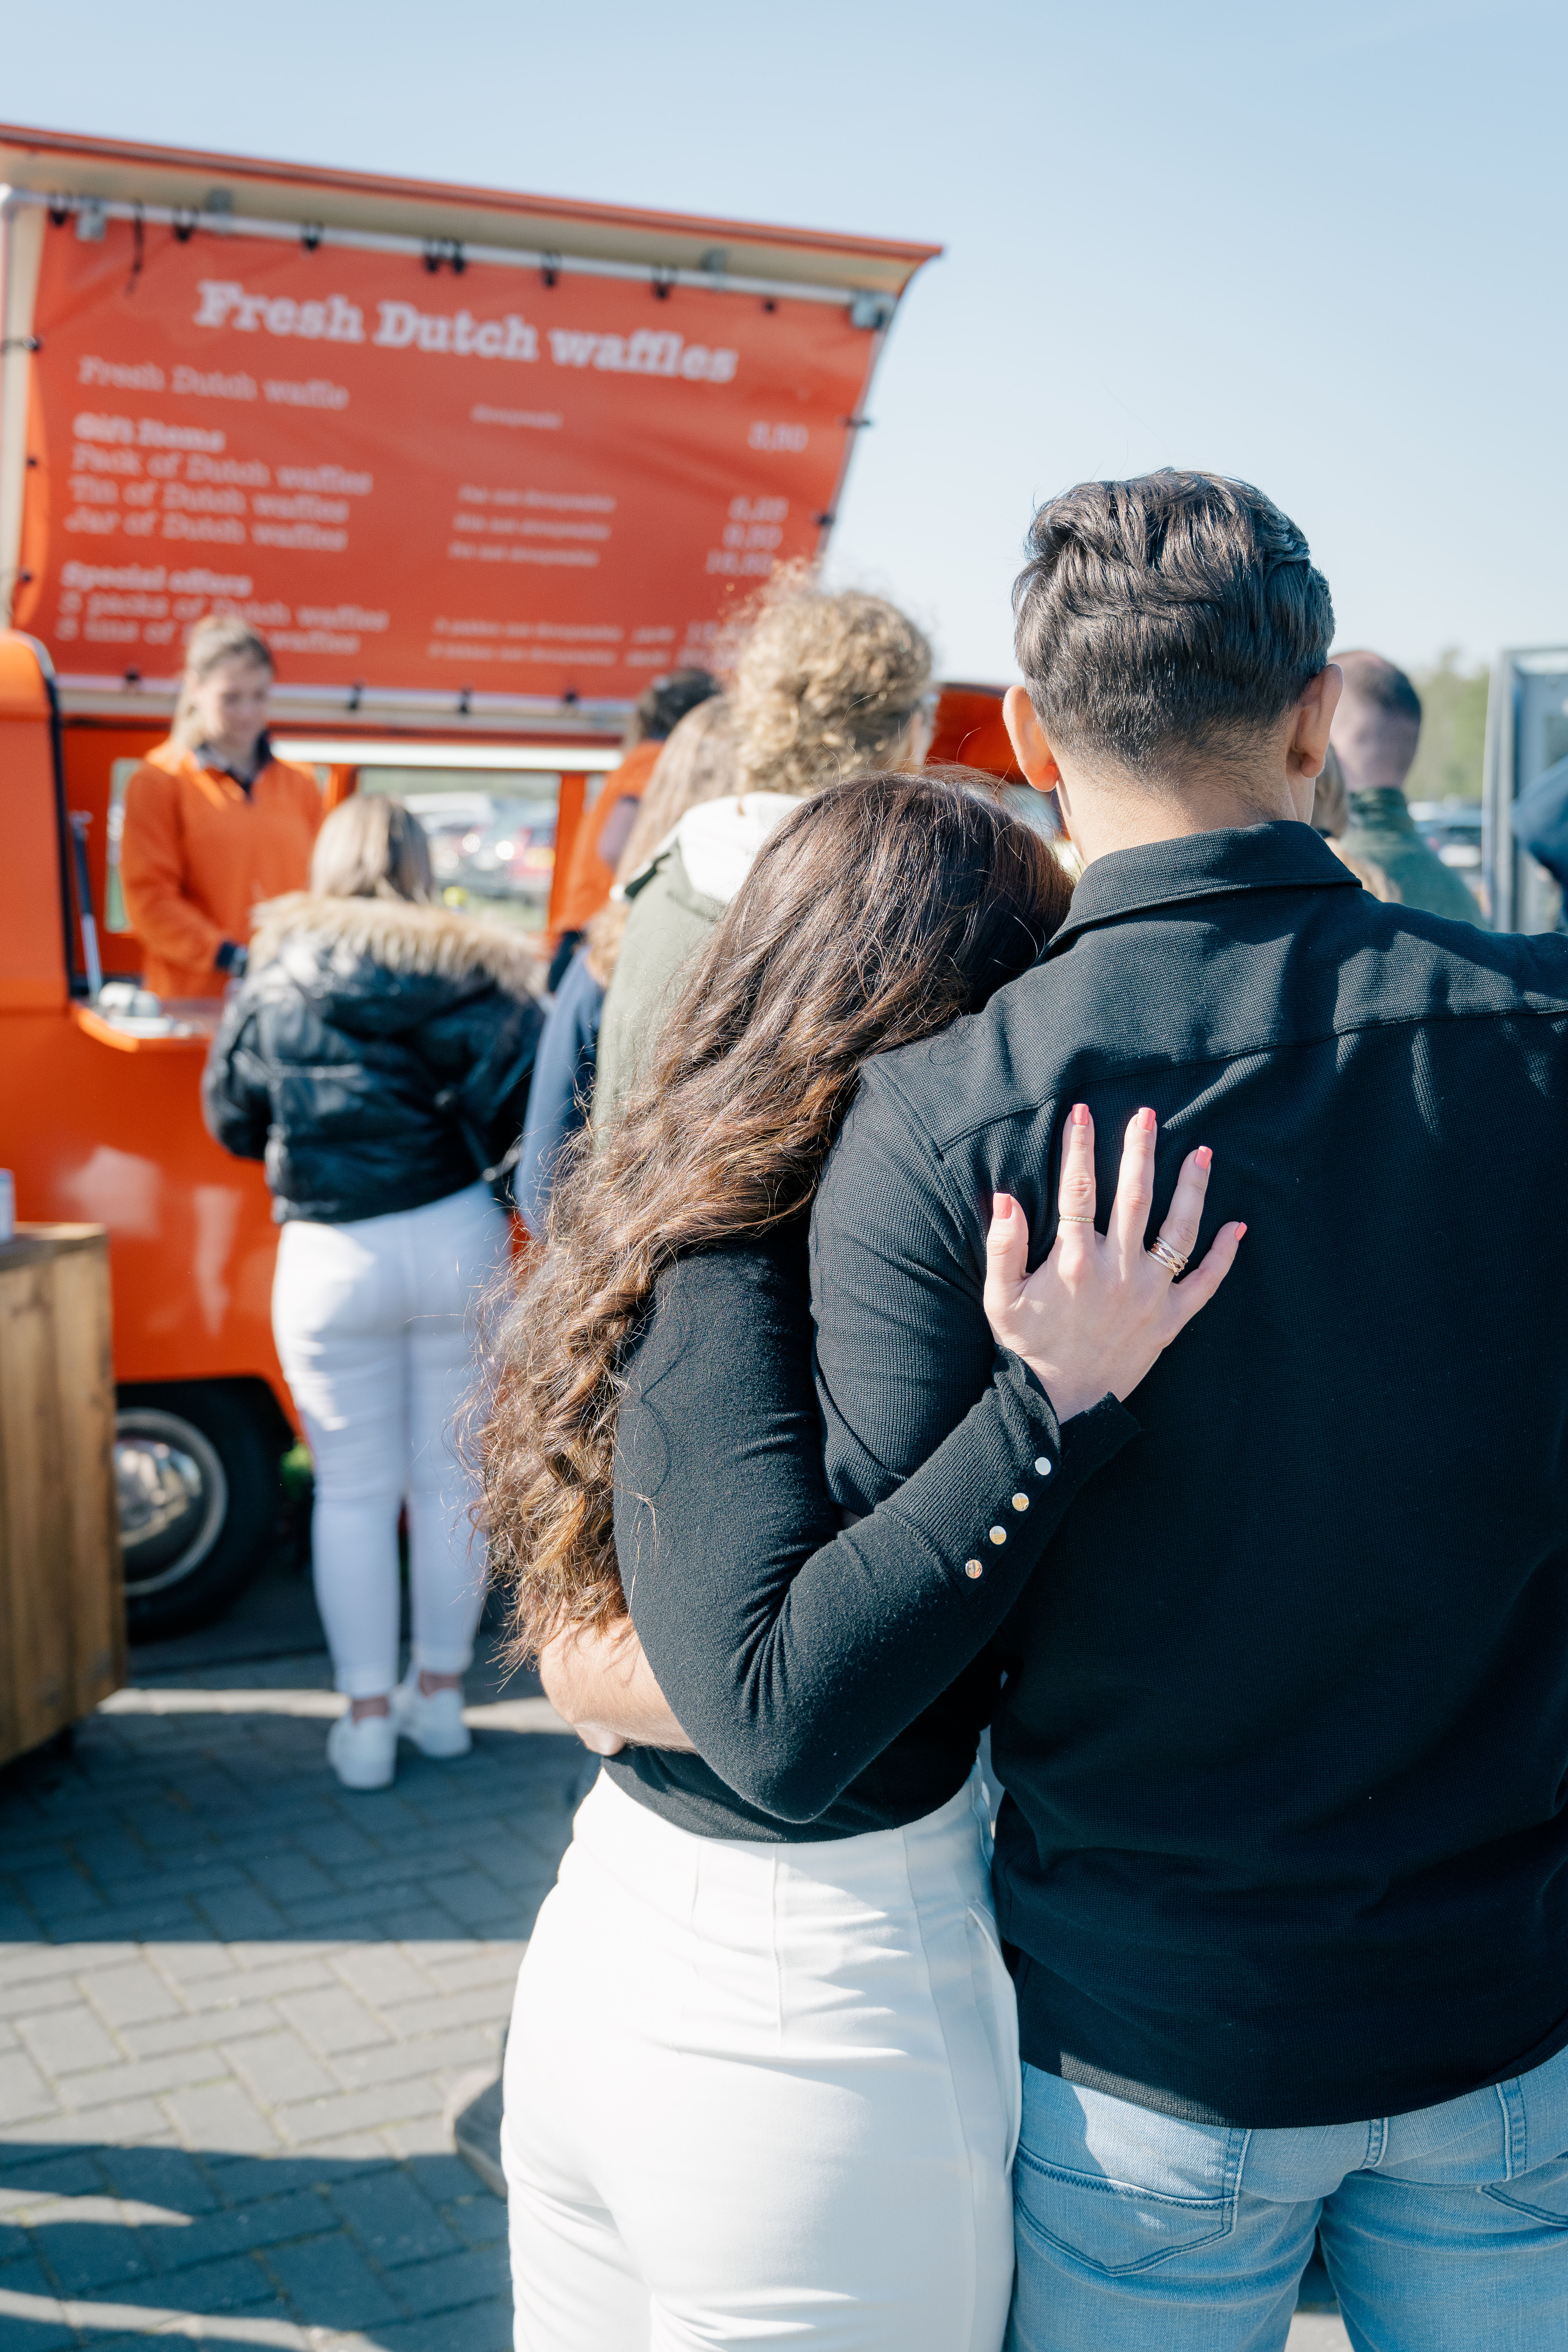 A man and woman stand with their arms around each other as they wait in line at an orange van selling fresh Dutch waffles